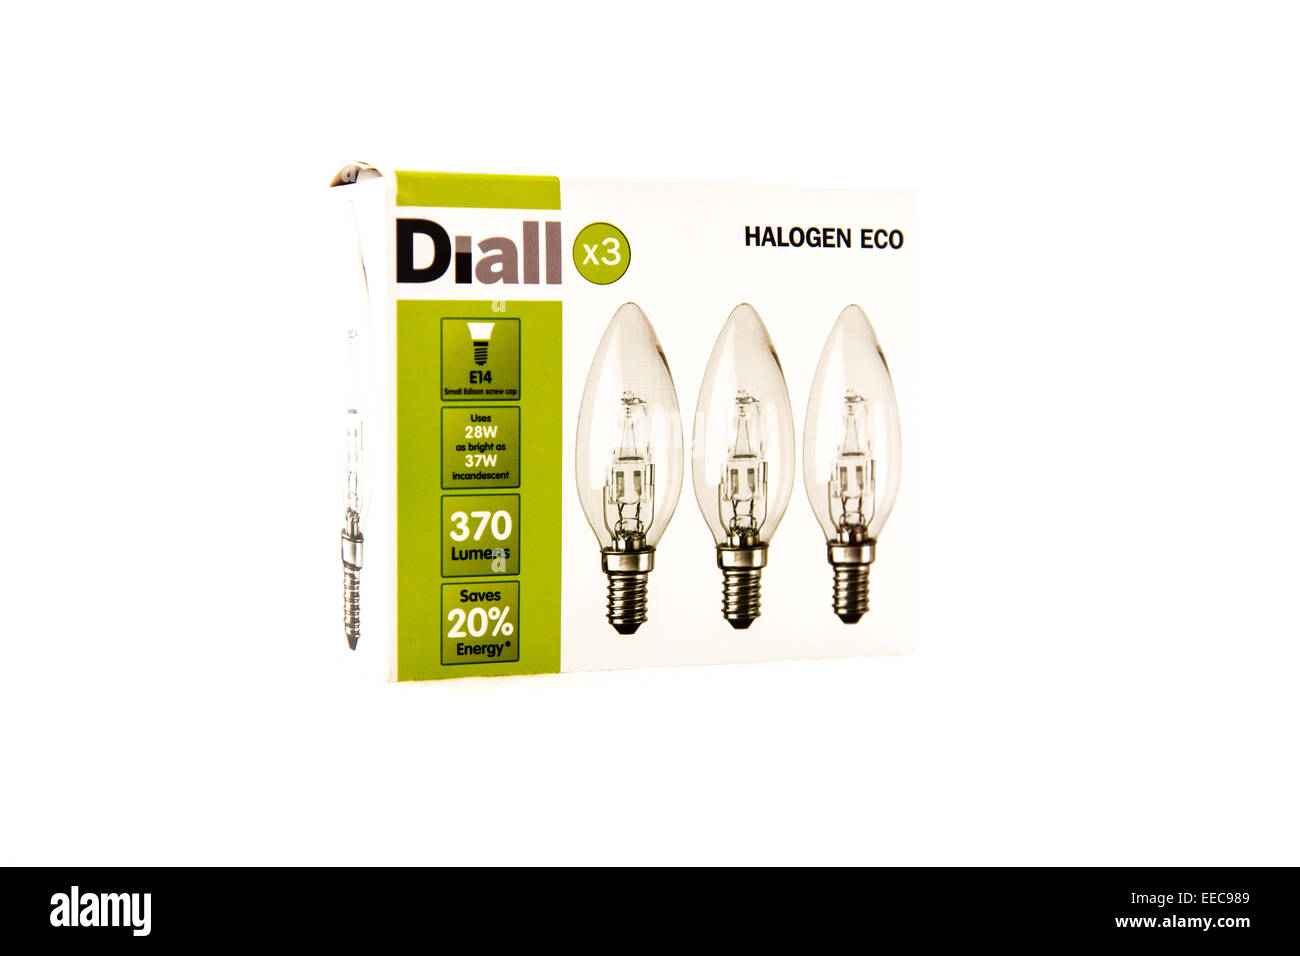 Halogen eco light bulb bulbs energy saver save pack packet diall box  lightbulb cut out copy space white background Stock Photo - Alamy